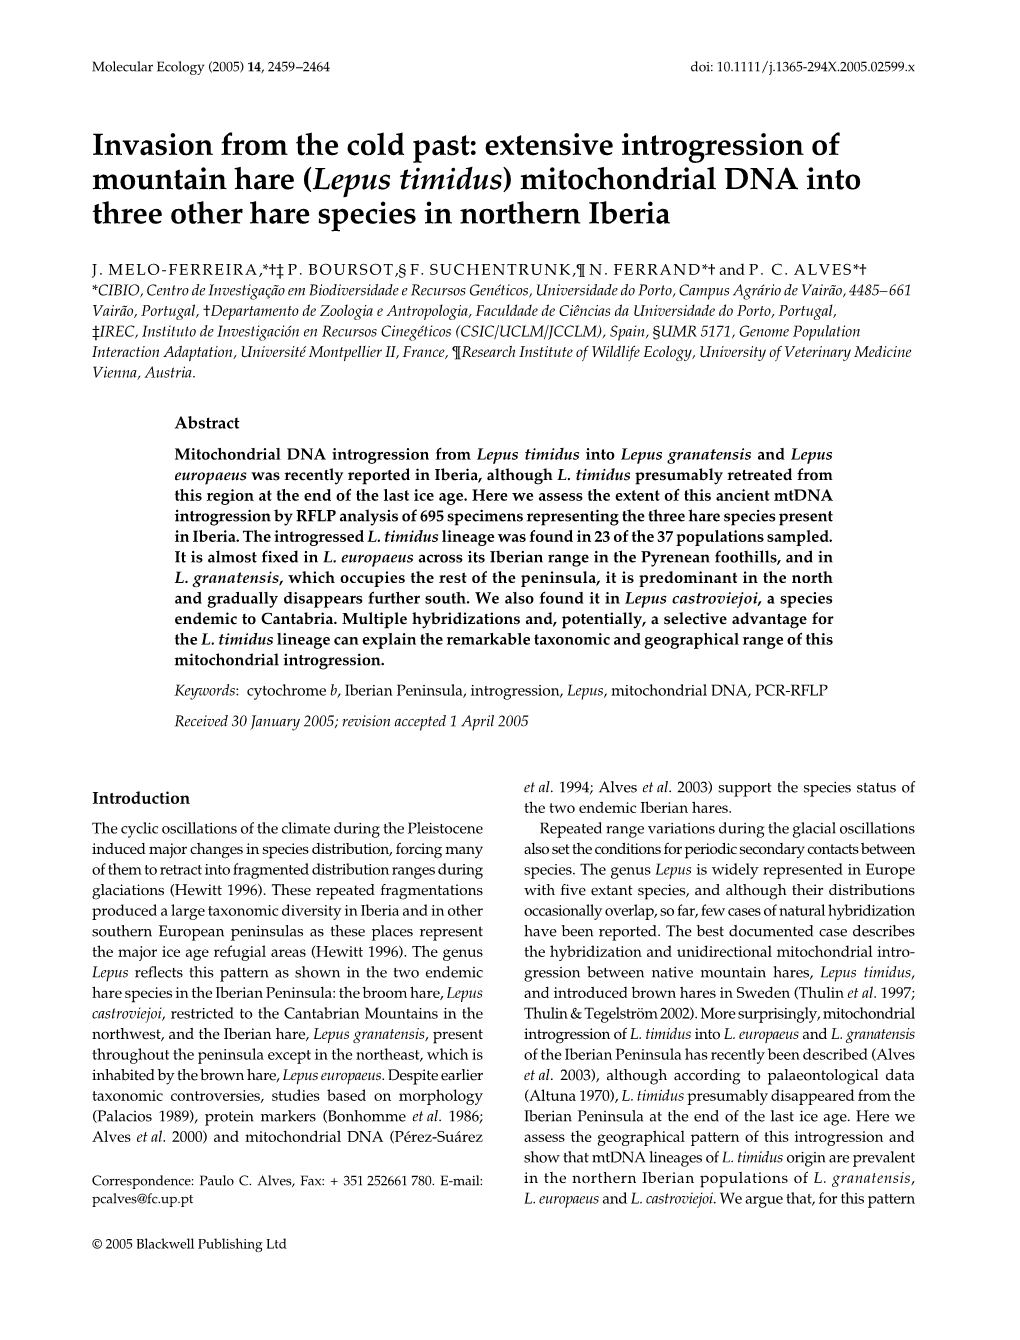 Lepus Timidus) Mitochondrial DNA Into Three Other Hare Species in Northern Iberia